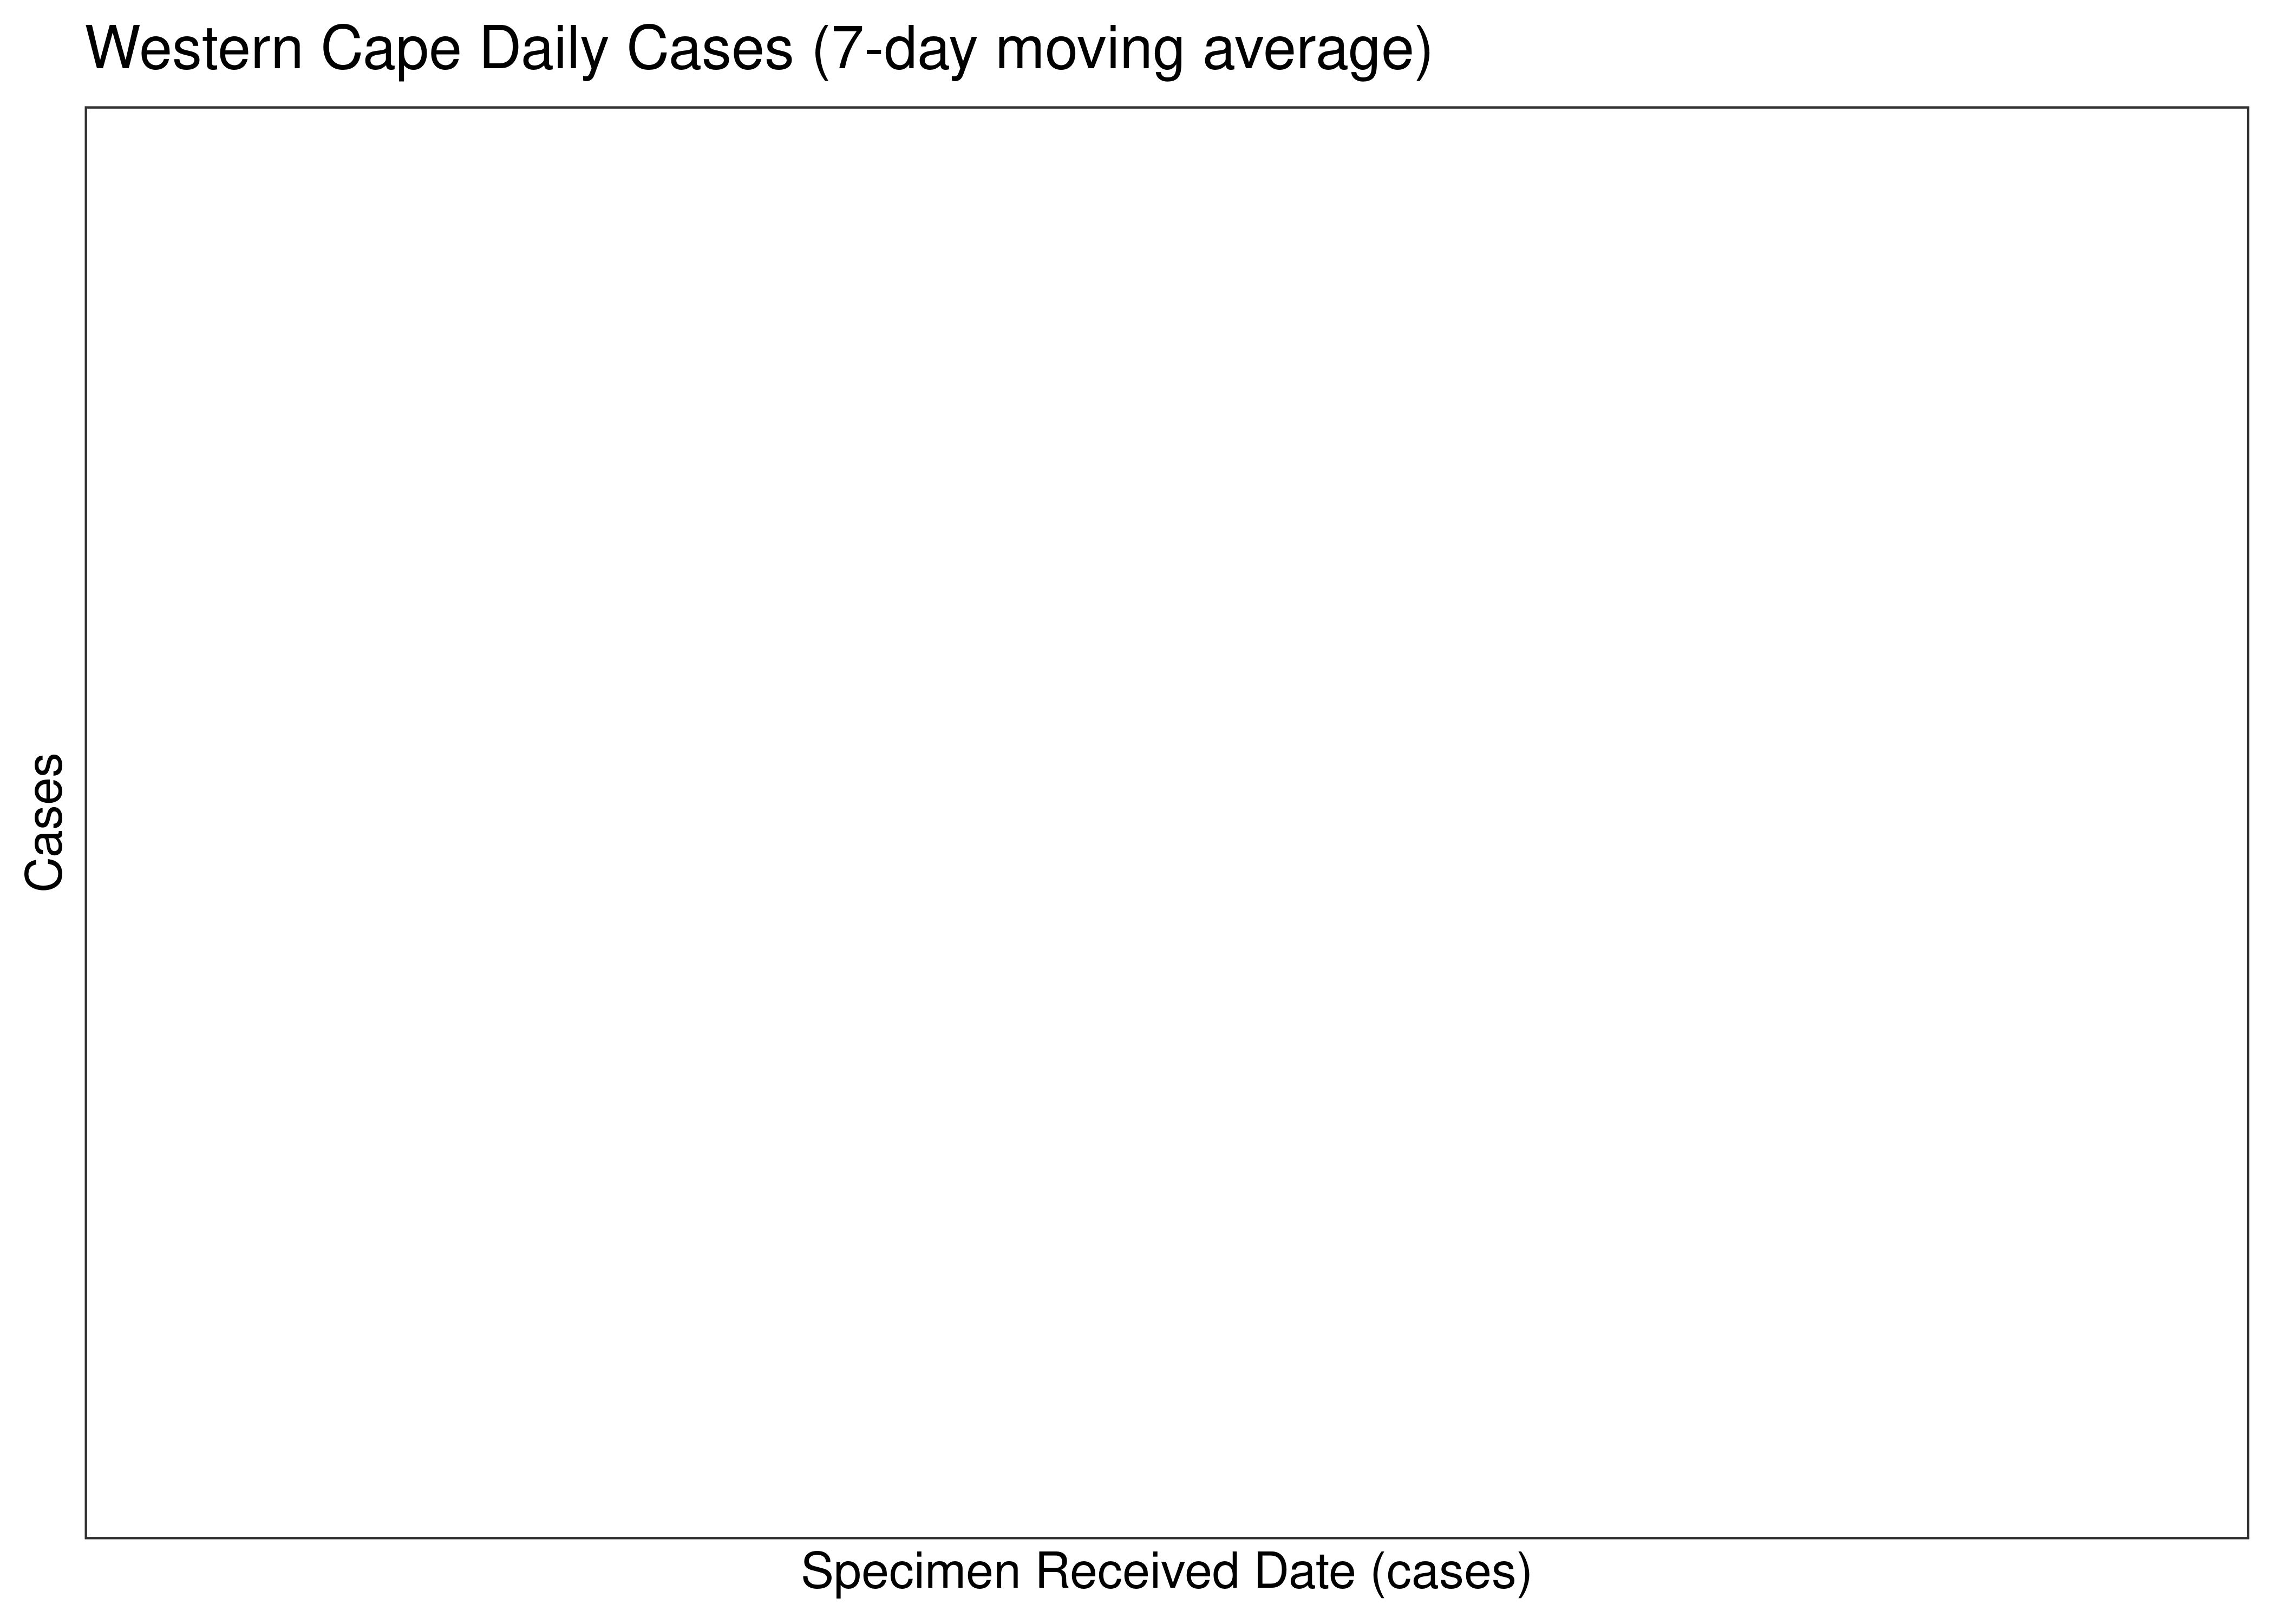 Western Cape Daily Cases for Last 30-days (7-day moving average)